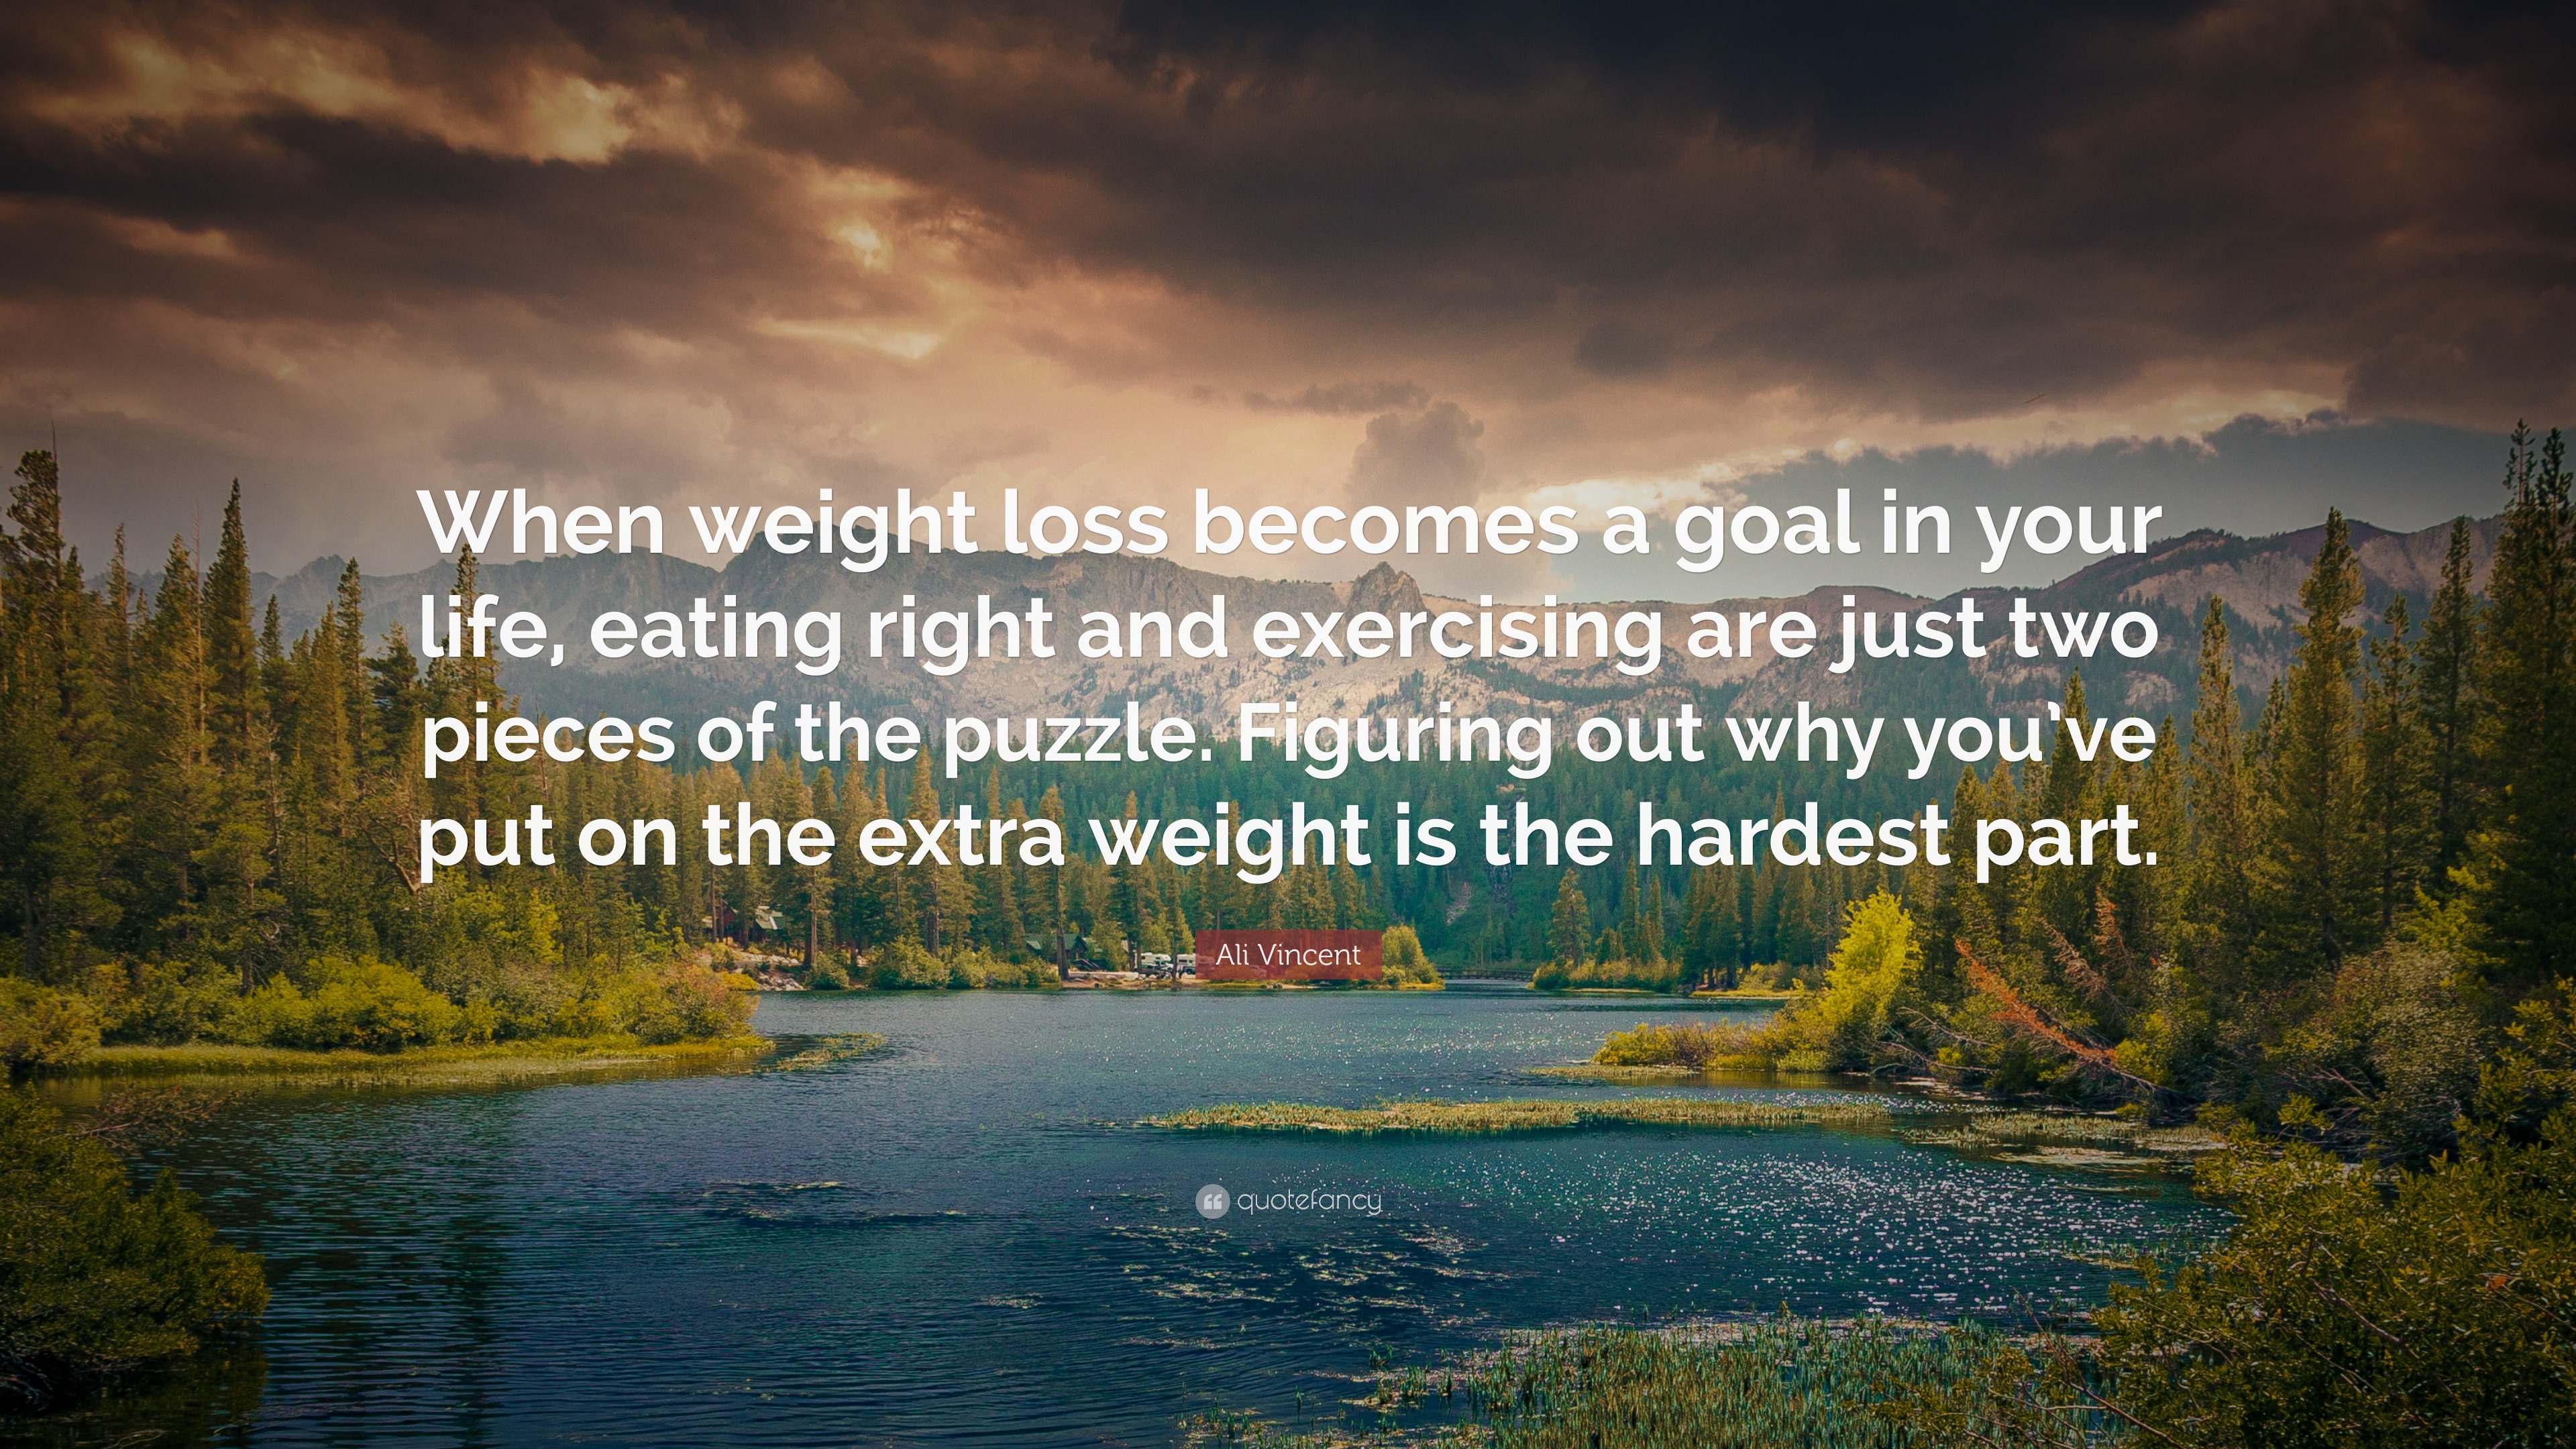 Ali Vincent Quote: “When weight loss becomes a goal in your life, eating  right and exercising are just two pieces of the puzzle. Figuring ou...”